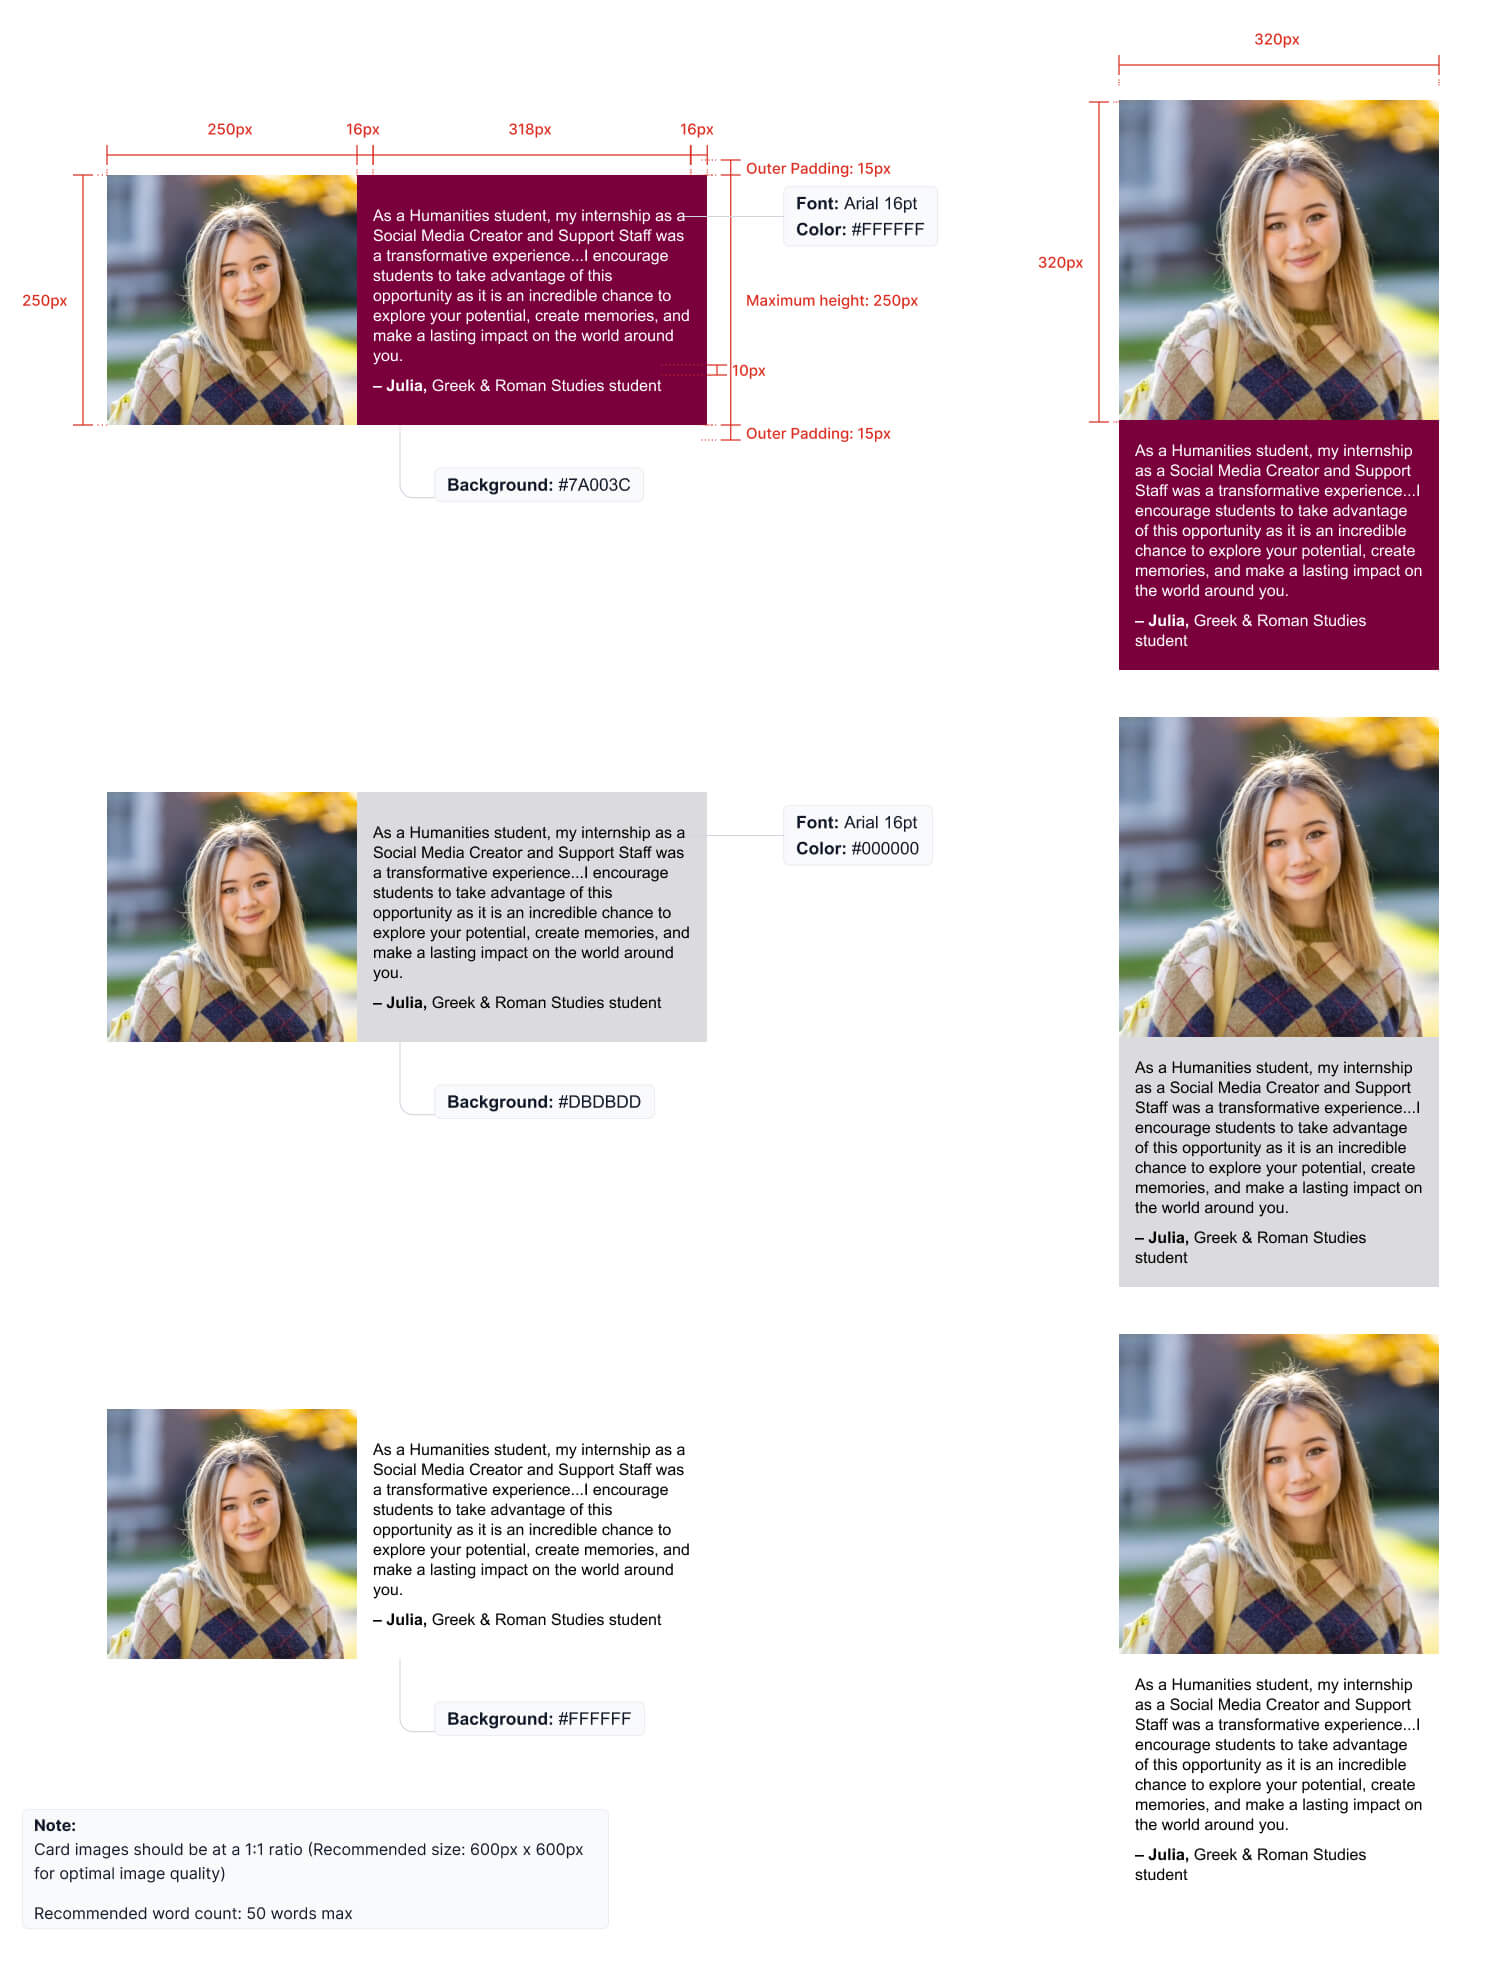 Three different examples of a student Quote are shown on desktop and mobile. The desktop versions have the student's headshot to the left and the text on the right, whereas the mobile versions have the headshot on top and the quote below. The first example has a maroon background with white text. The second has a grey background with black text. The third has a white background with black text. 